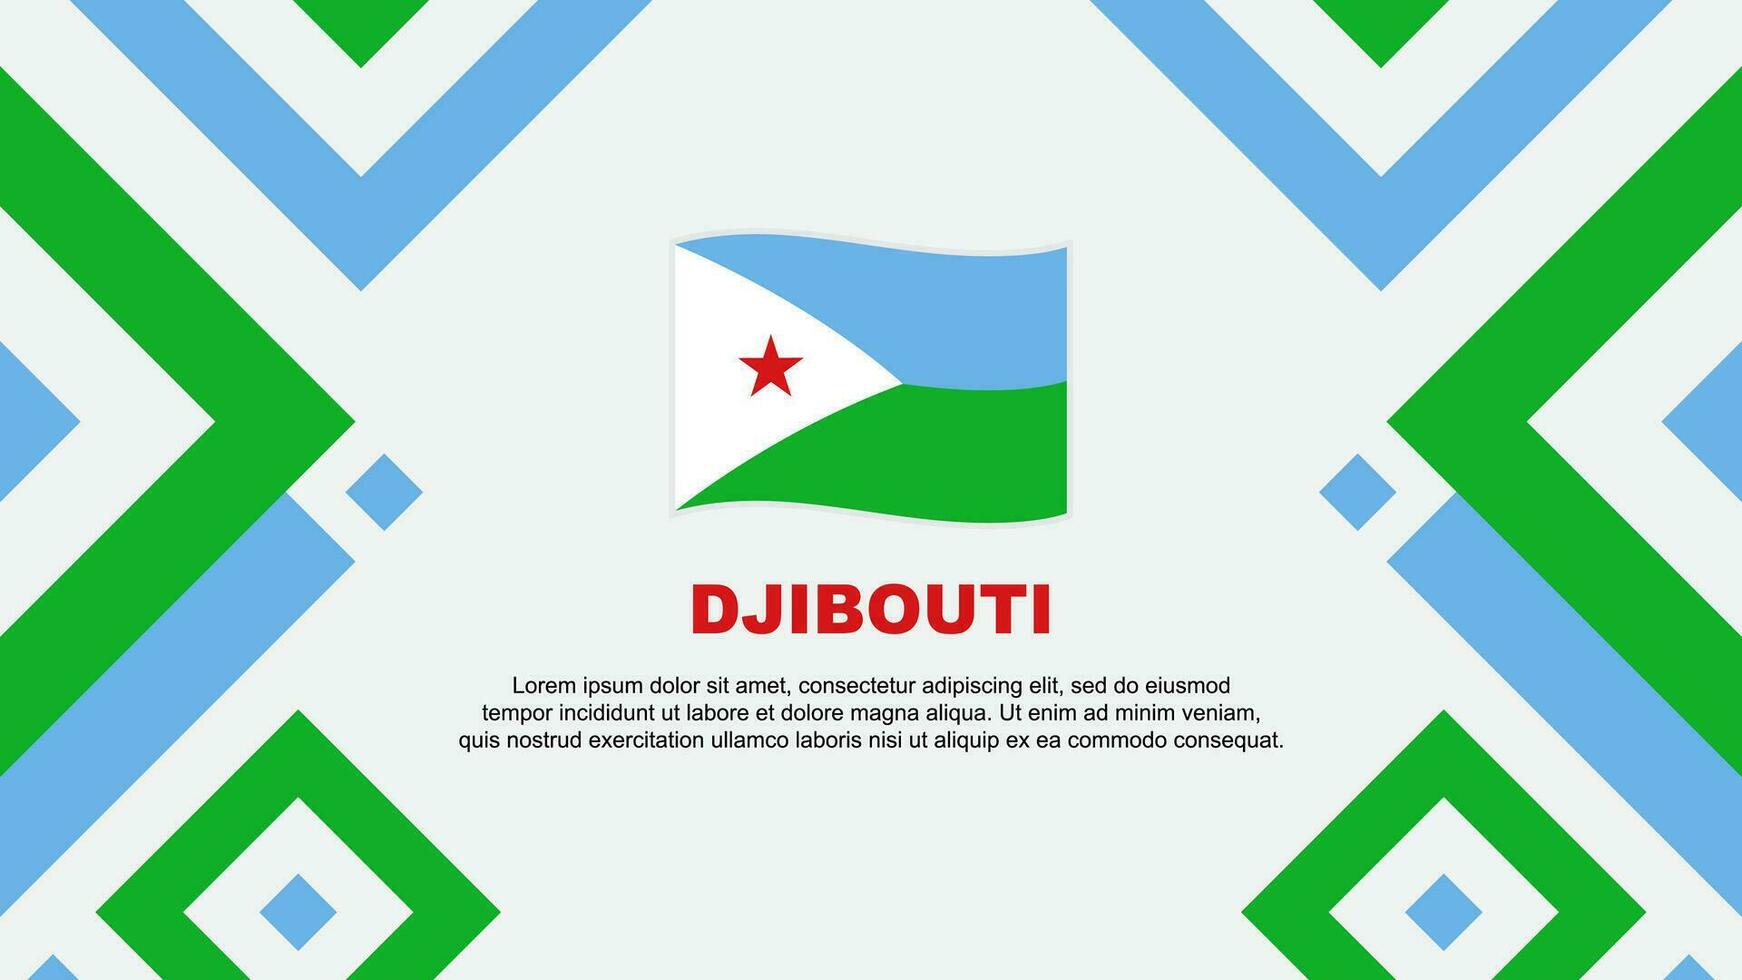 Djibouti Flag Abstract Background Design Template. Djibouti Independence Day Banner Wallpaper Vector Illustration. Djibouti Template